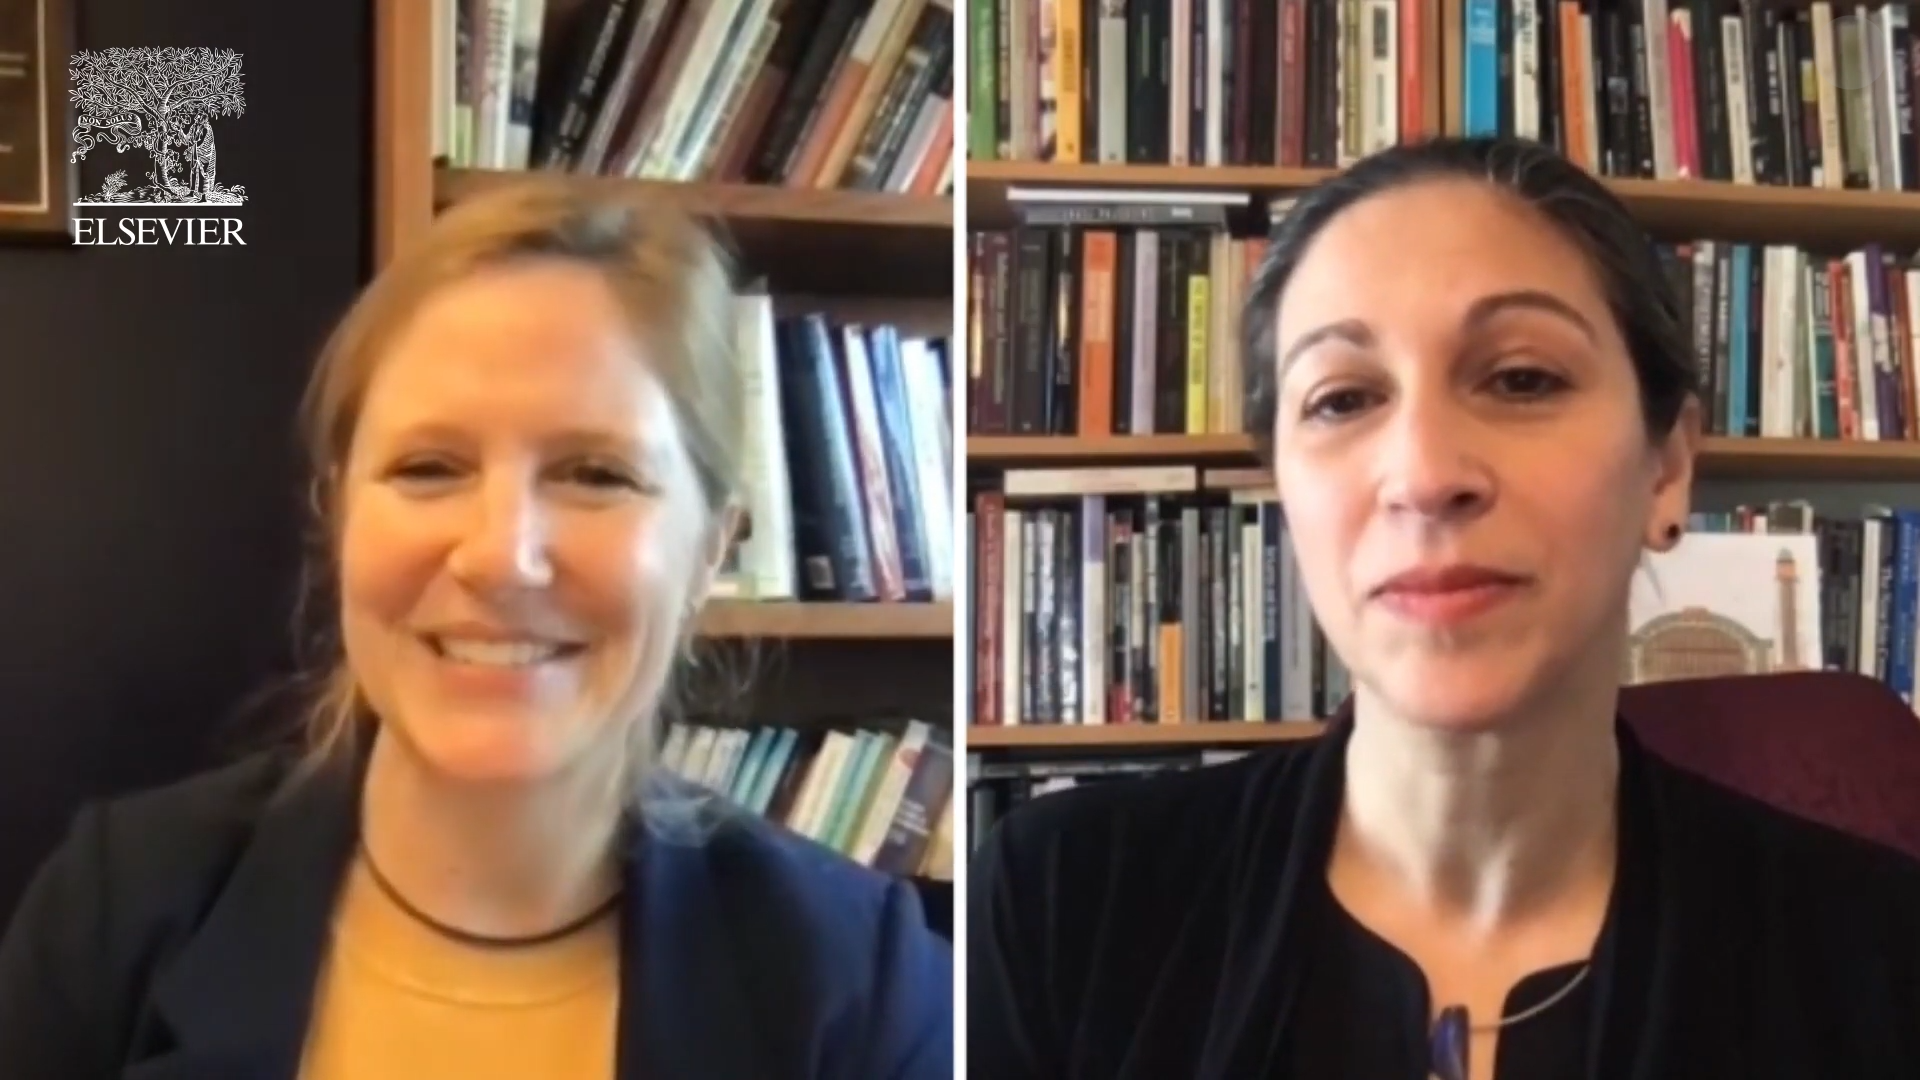 The SSM – Mental Health Video Podcast on Flourishing and Health in Critical Perspective. The panelists are Emily Mendenhall and Sarah S. Willen